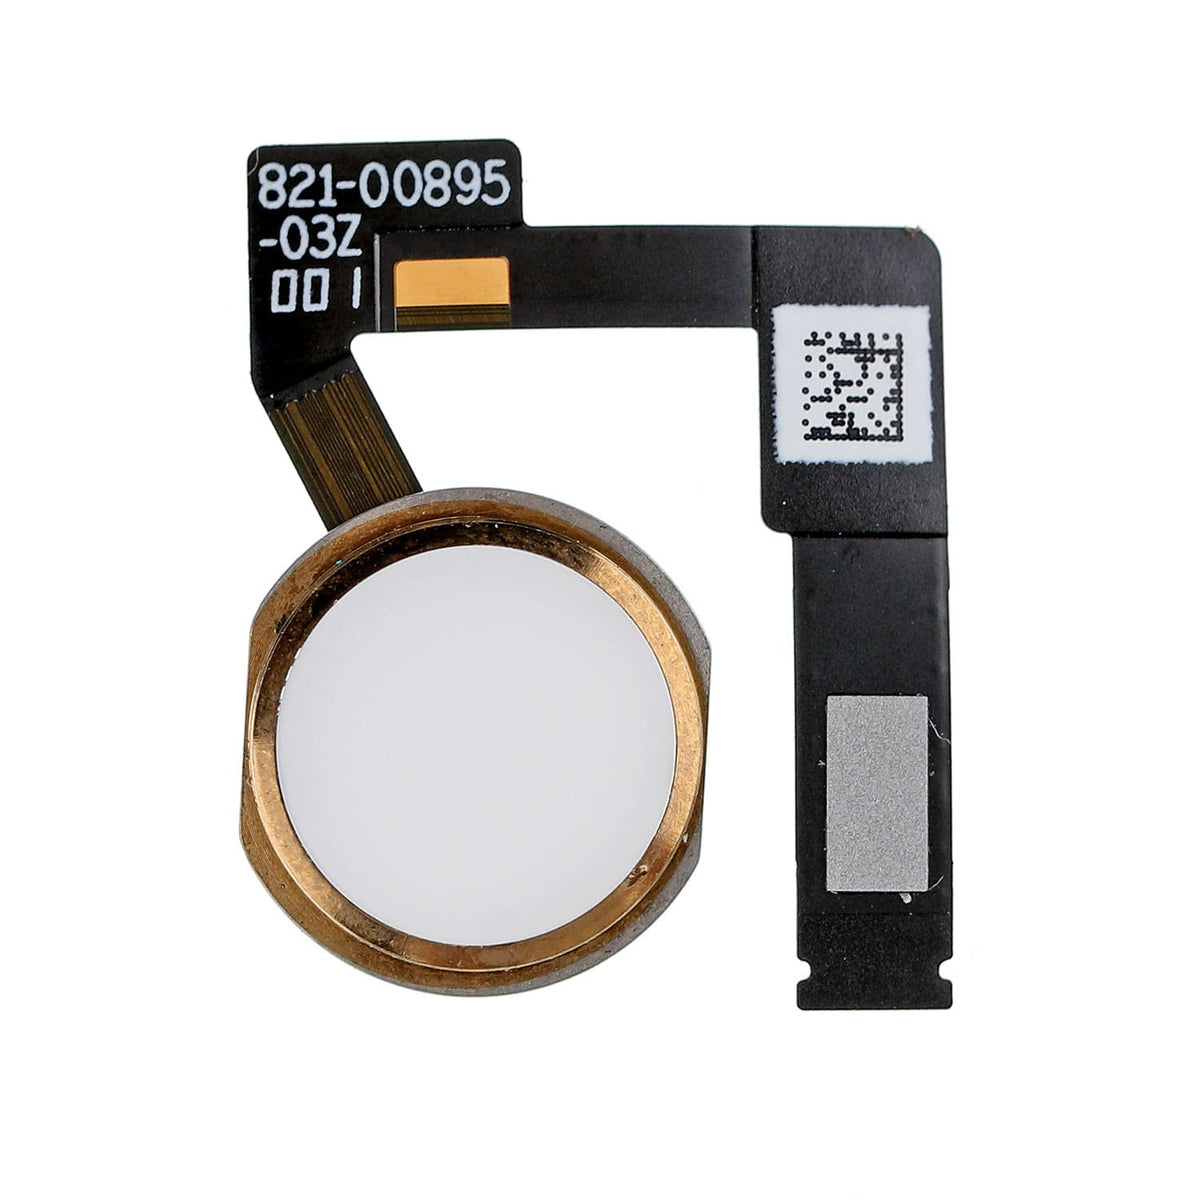 HOME BUTTON ASSEMBLY WITH FLEX CABLE RIBBON FOR IPAD AIR 3/ PRO 10.5" 1ST/12.9" 2ND GEN- GOLD